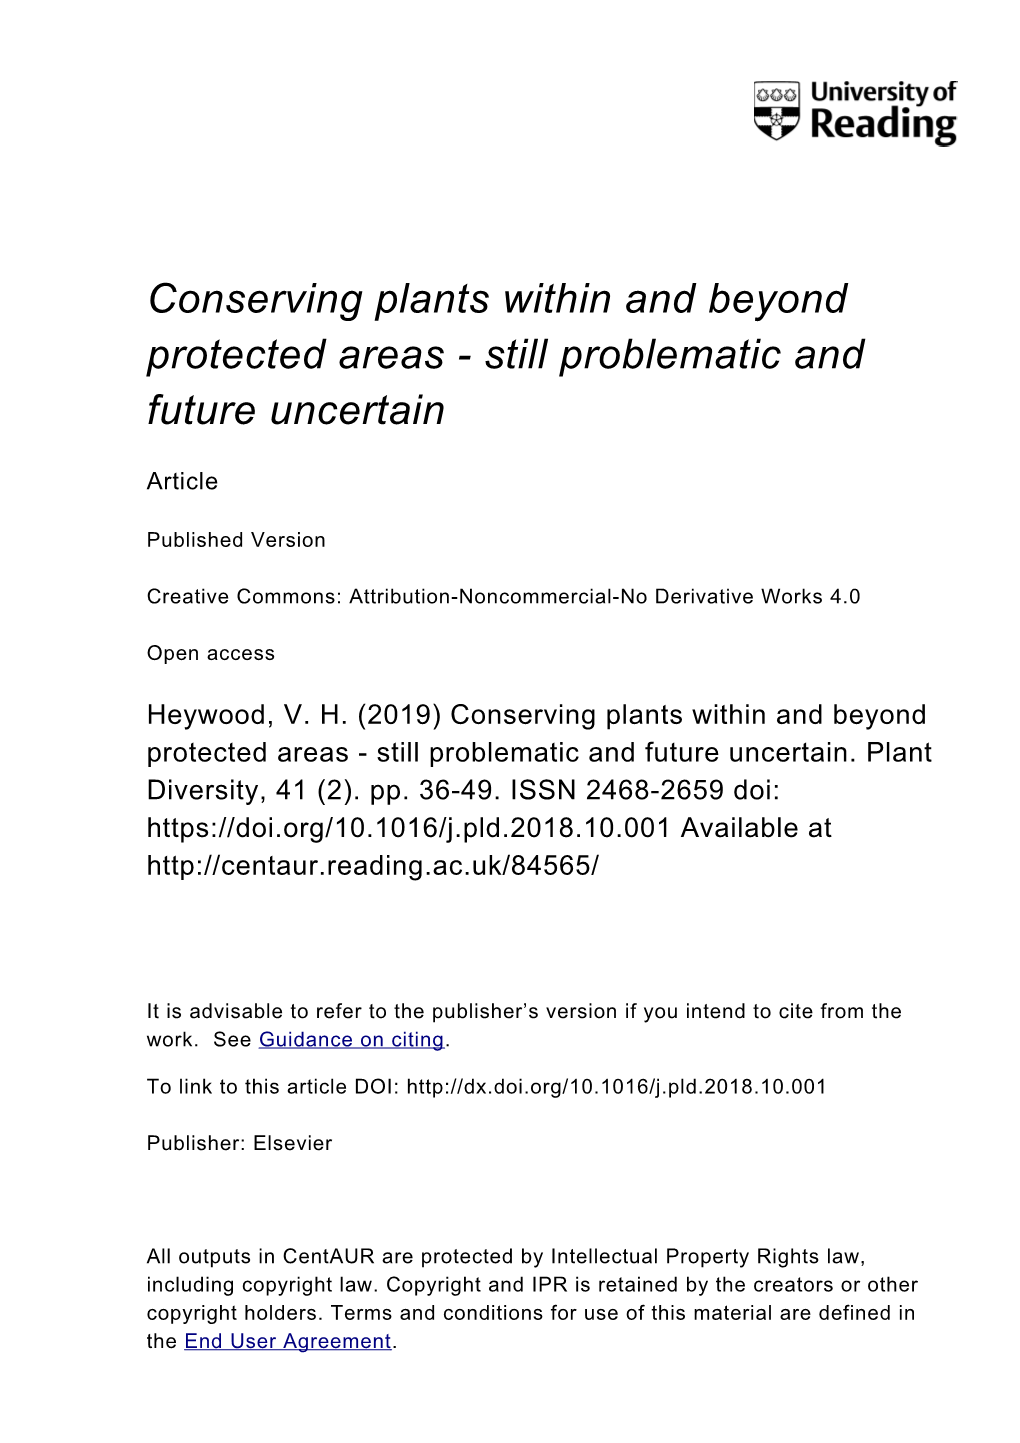 Conserving Plants Within and Beyond Protected Areas - Still Problematic and Future Uncertain